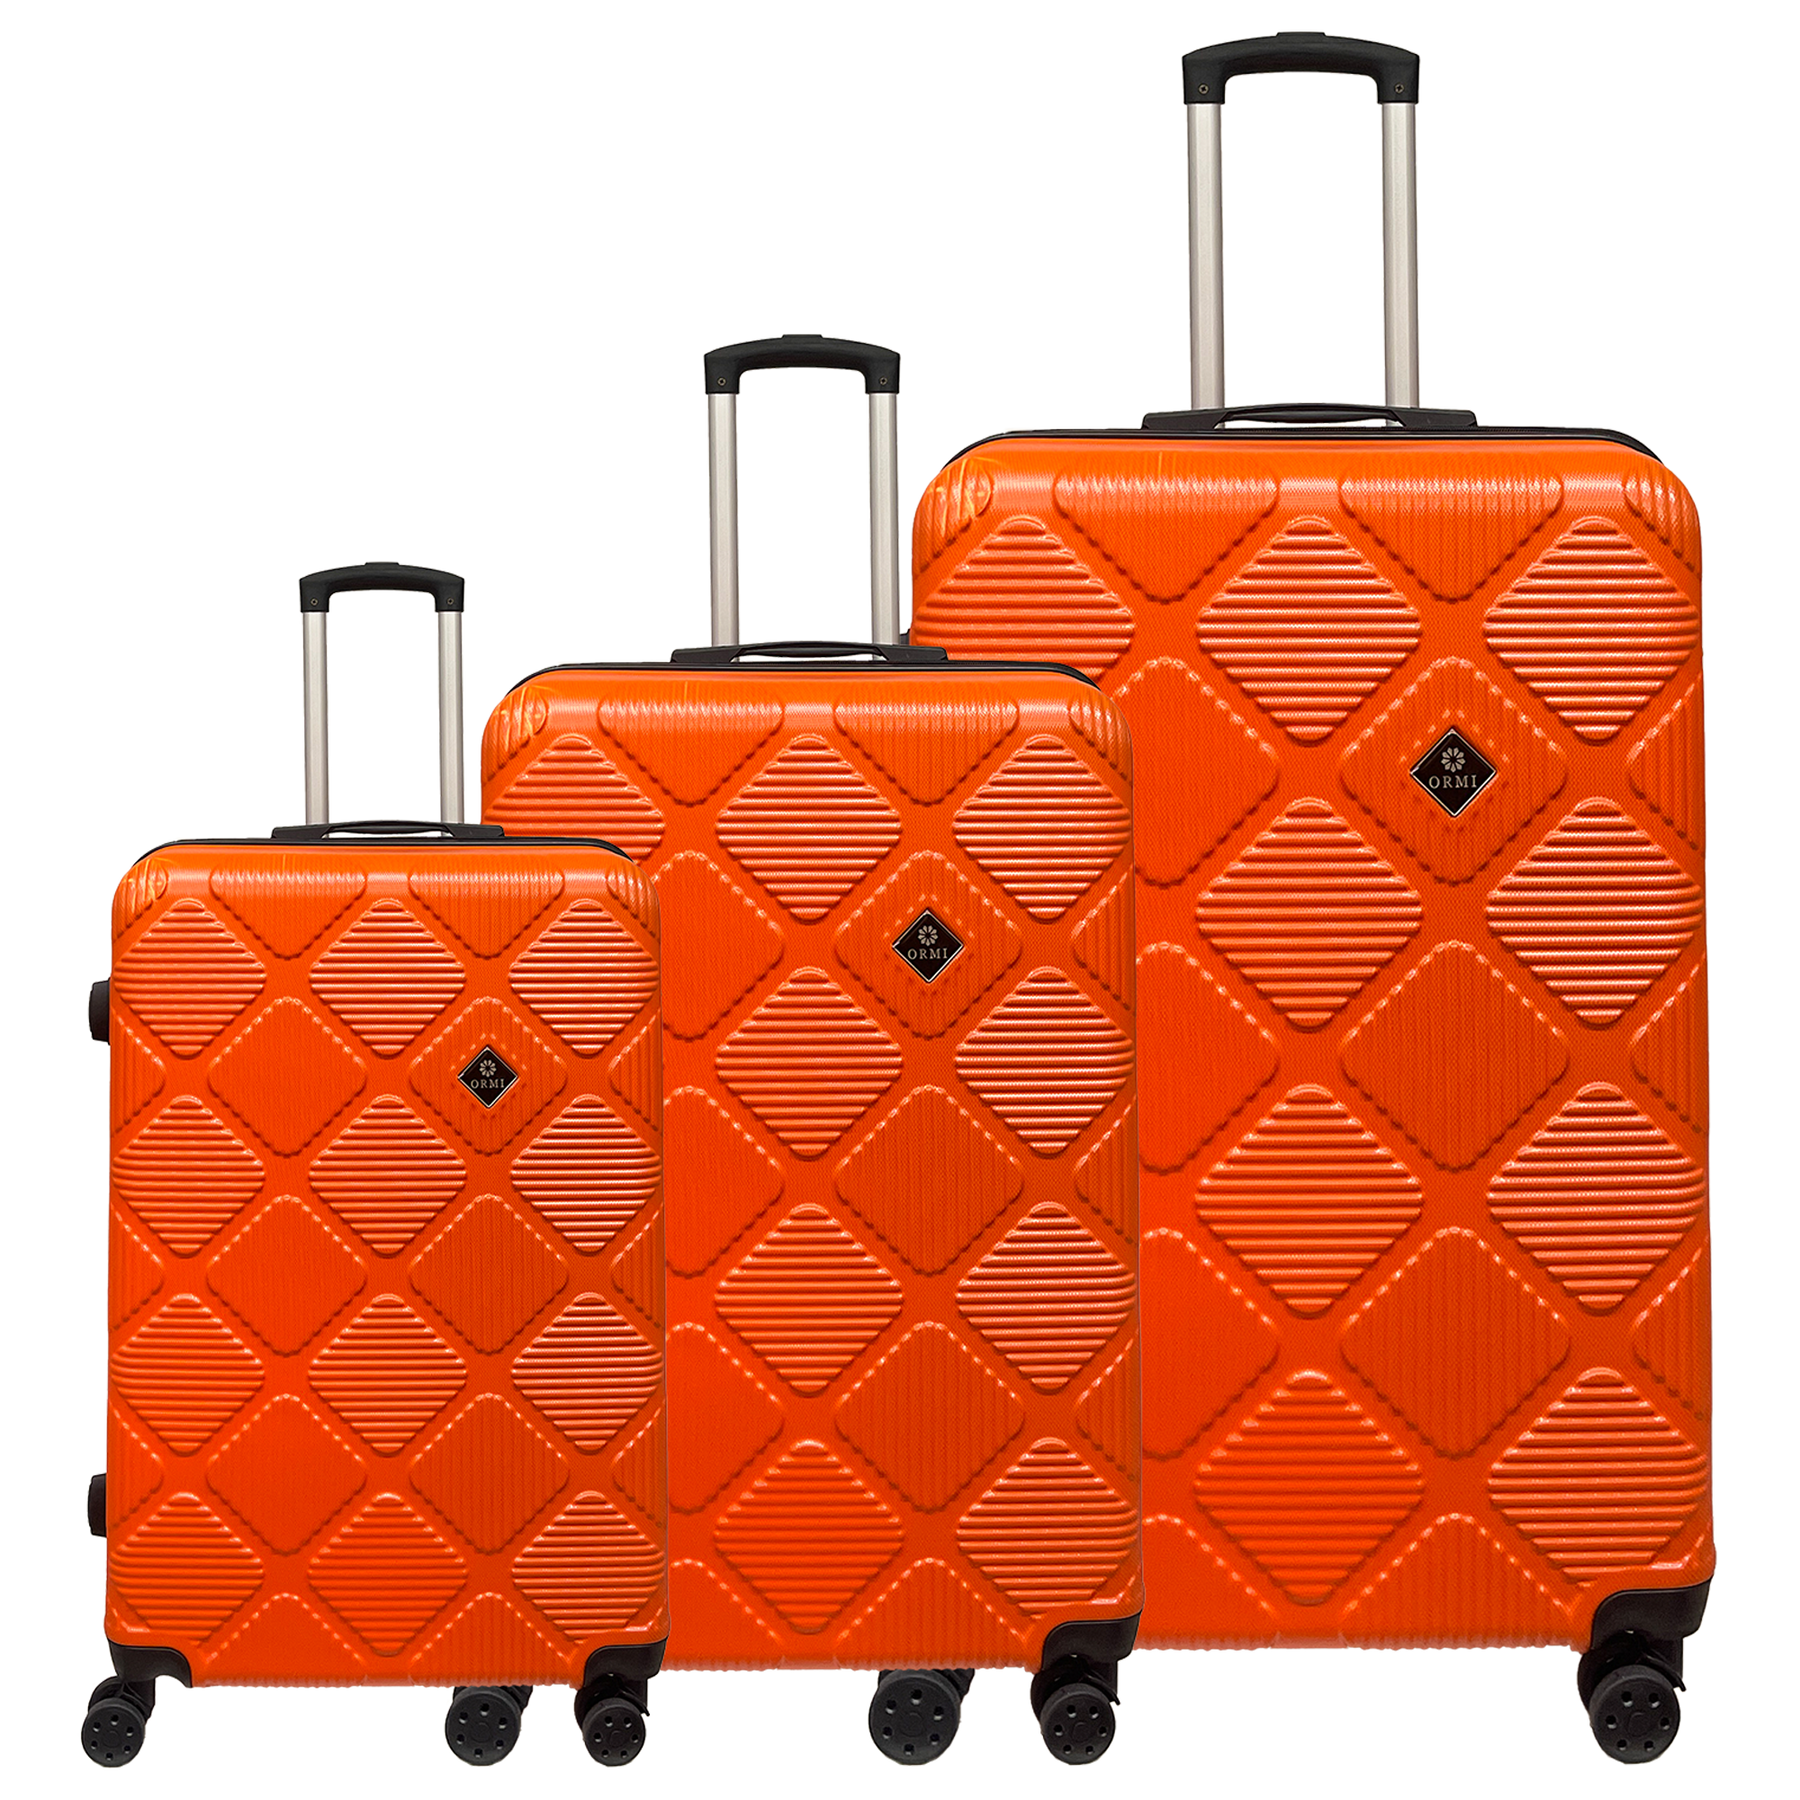 Ormi Diamond Lux Travel Luggage Set - Lightweight, Durable, and Elegant | Includes 3 Trolleys